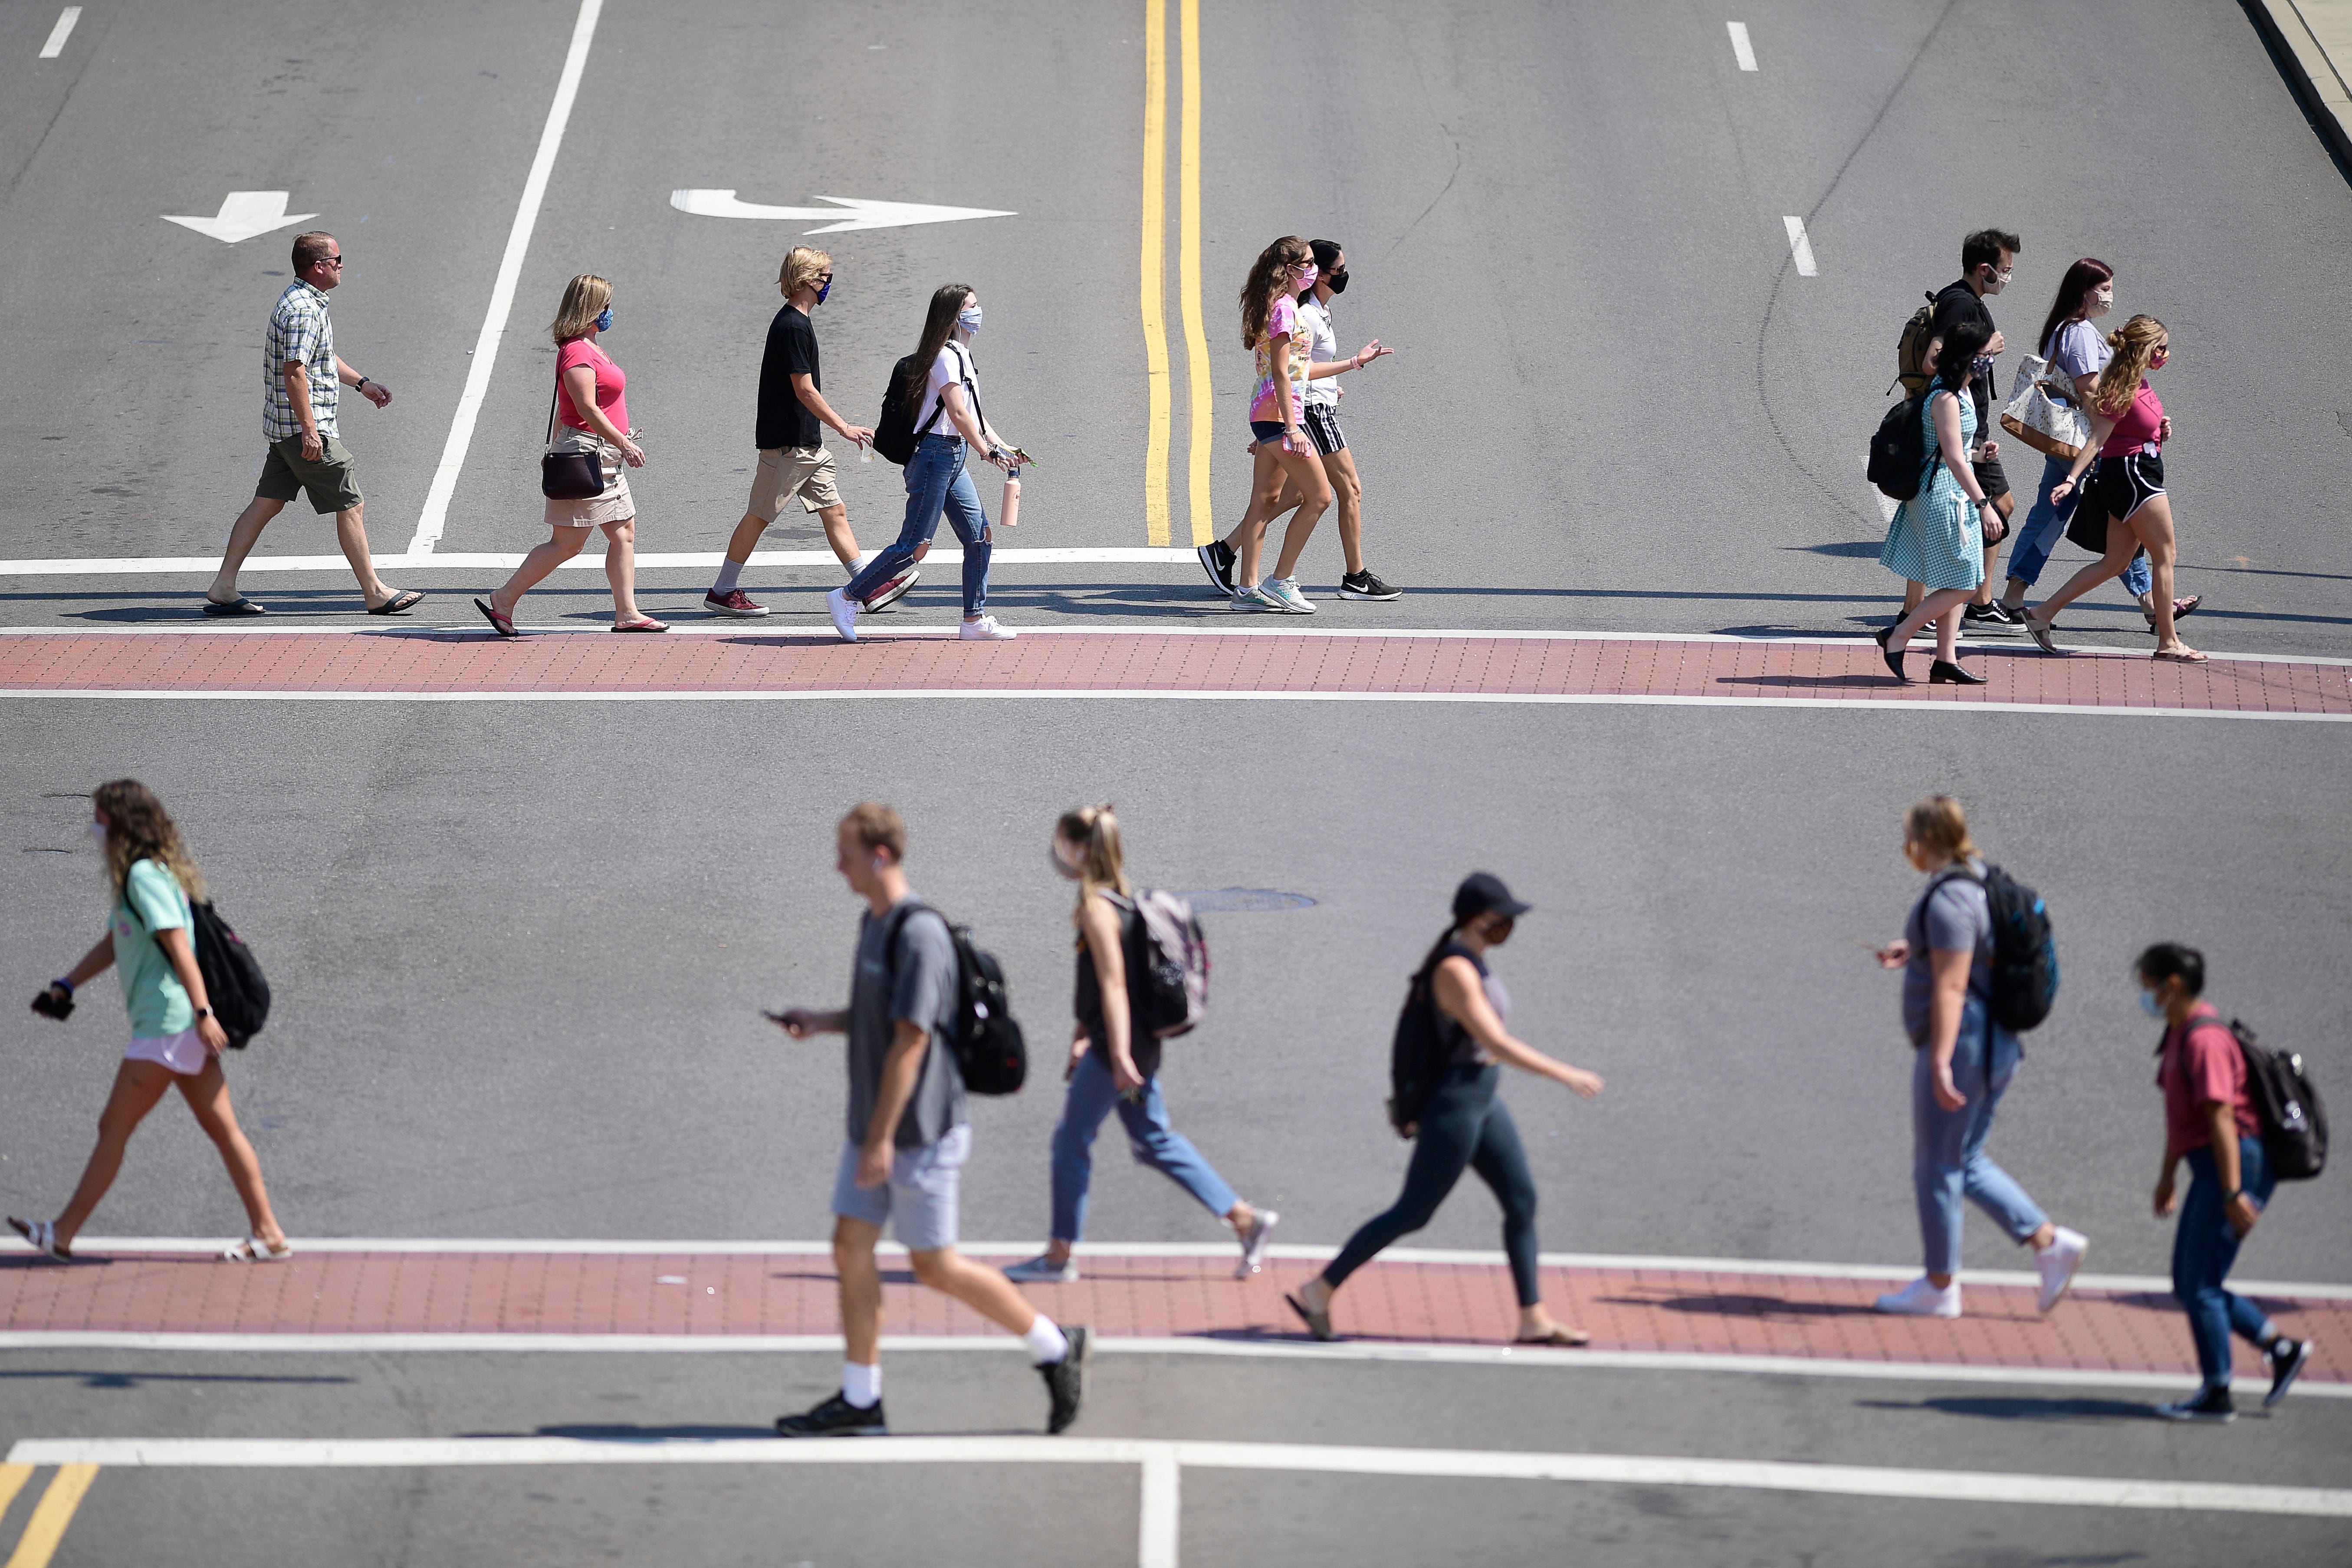 Life returned to college campuses as students cross Cumberland Avenue and Volunteer Boulevard at the University of Tennessee in Knoxville on Sept. 8.